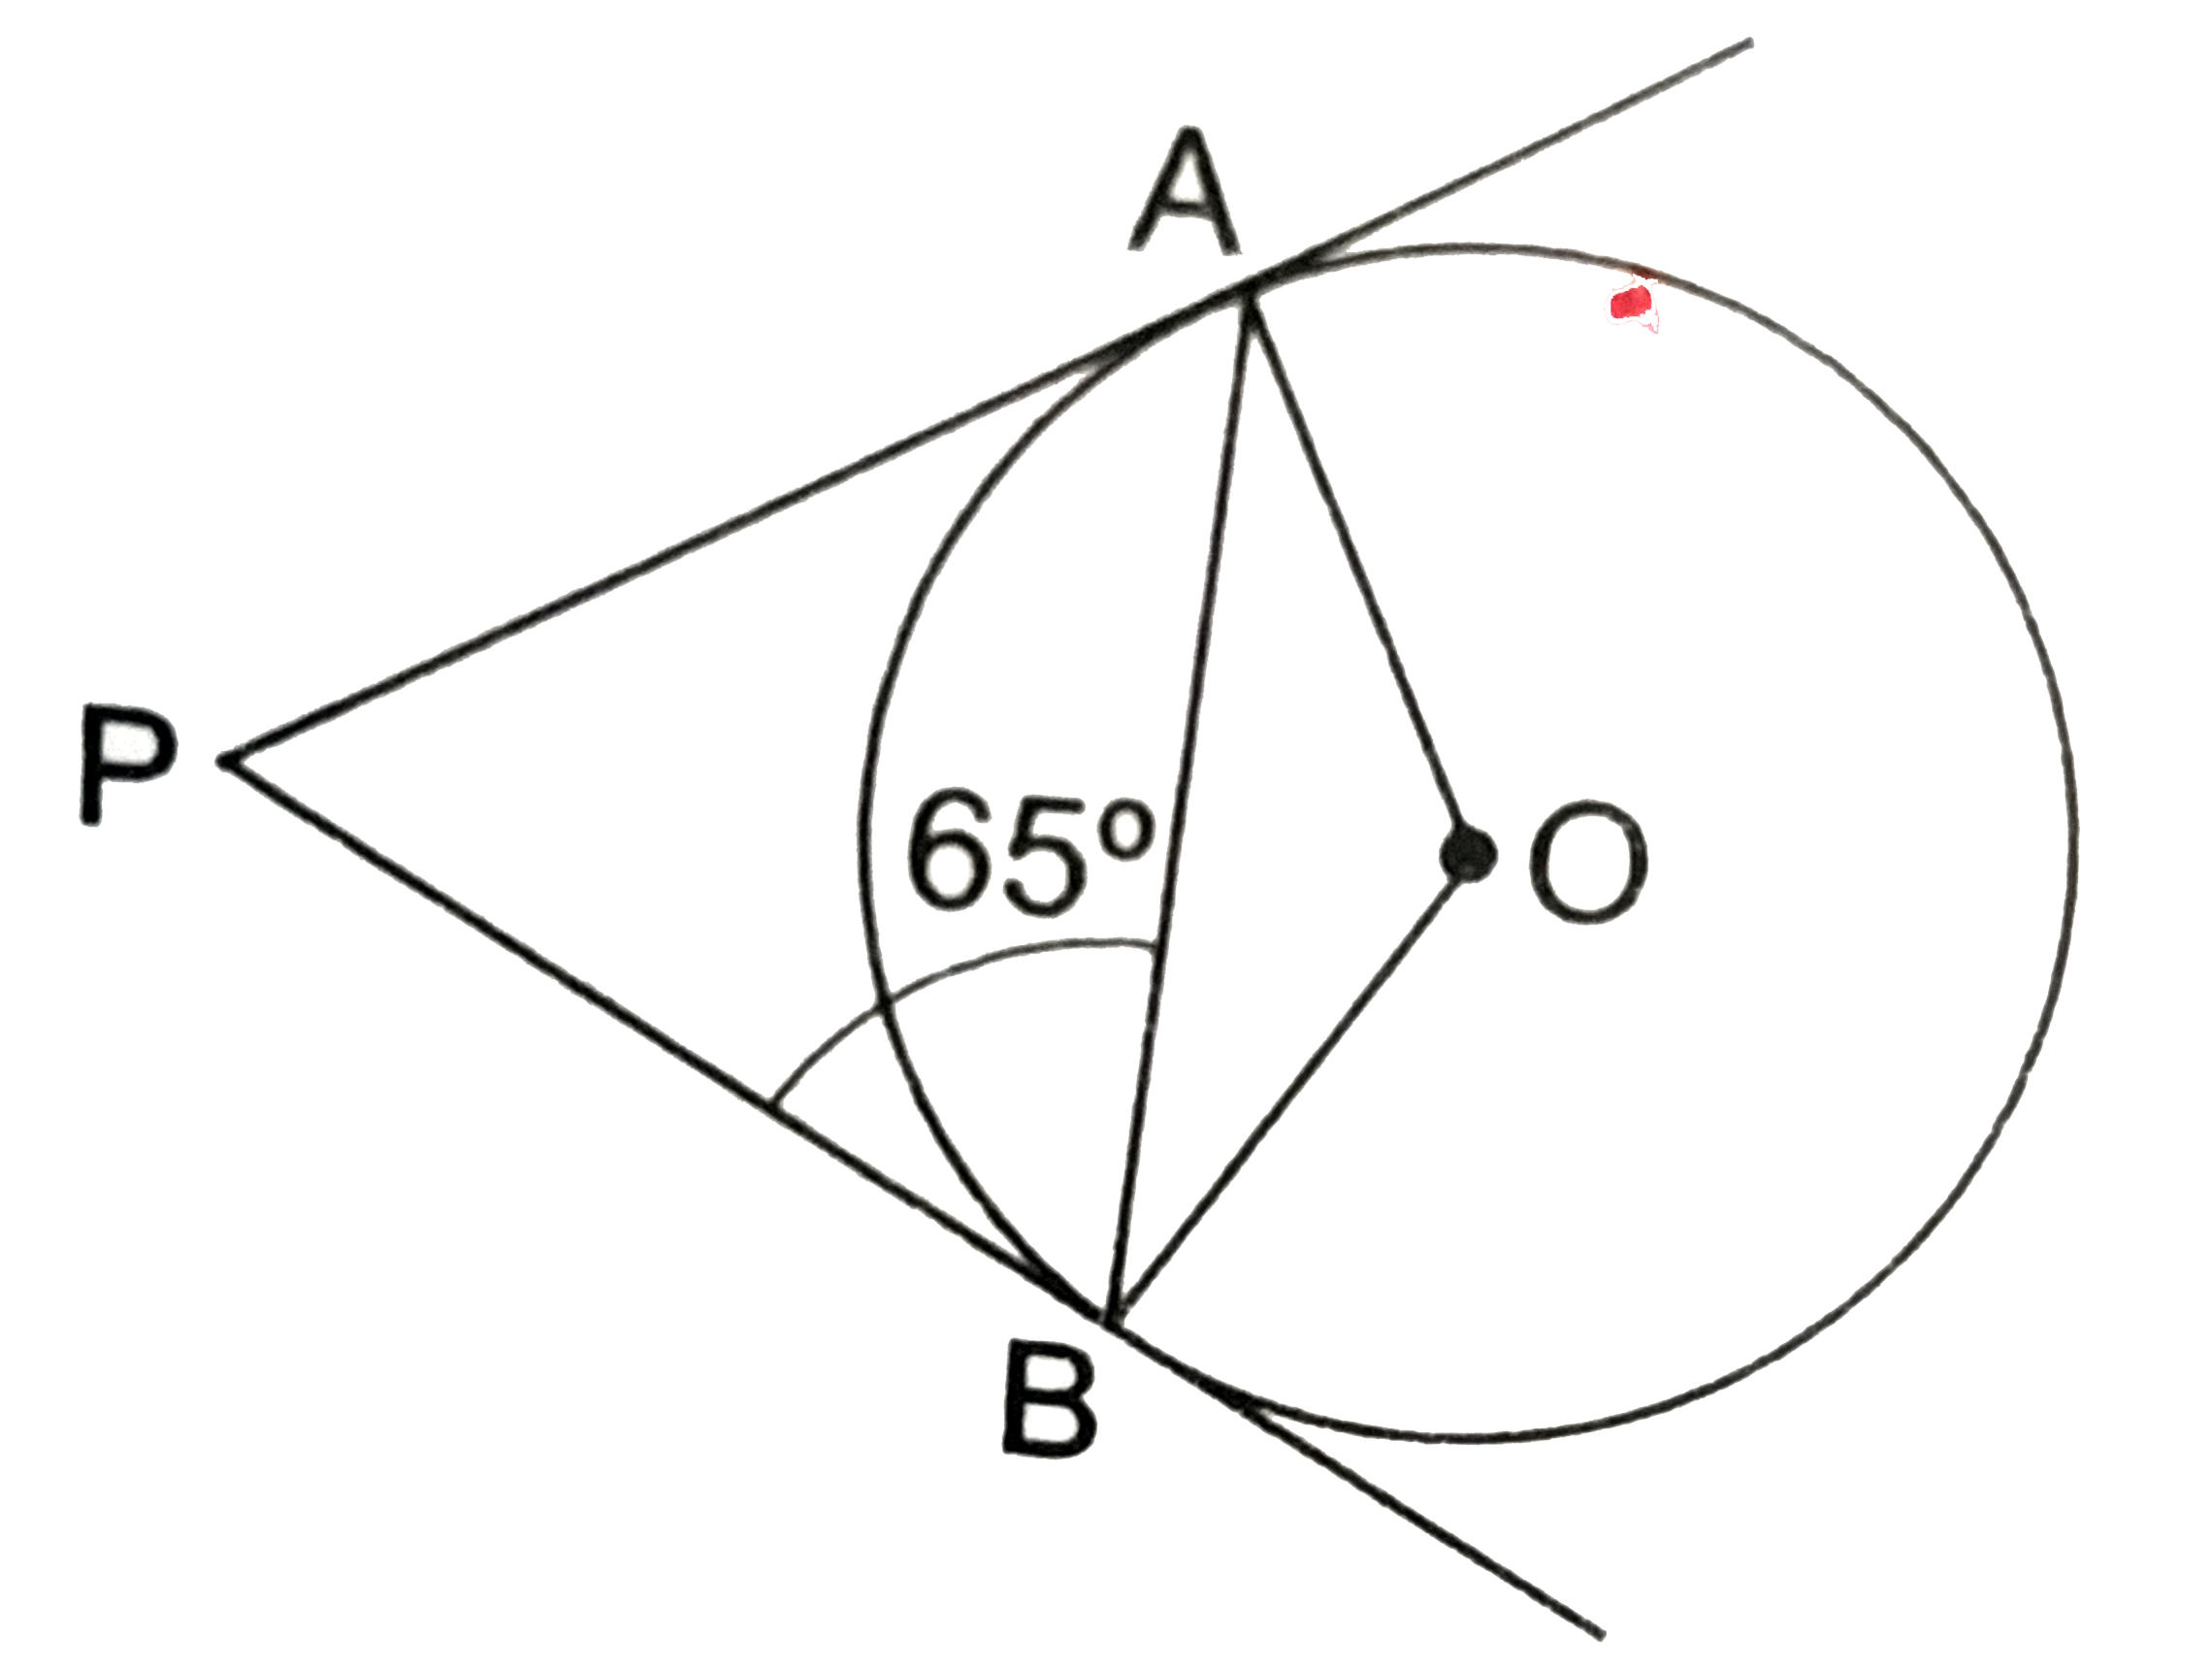 In the given figure, PA and PB are two tangents from an external point P to a circle with centre O. If /PBA=65^(@), find /OAB and /APB.